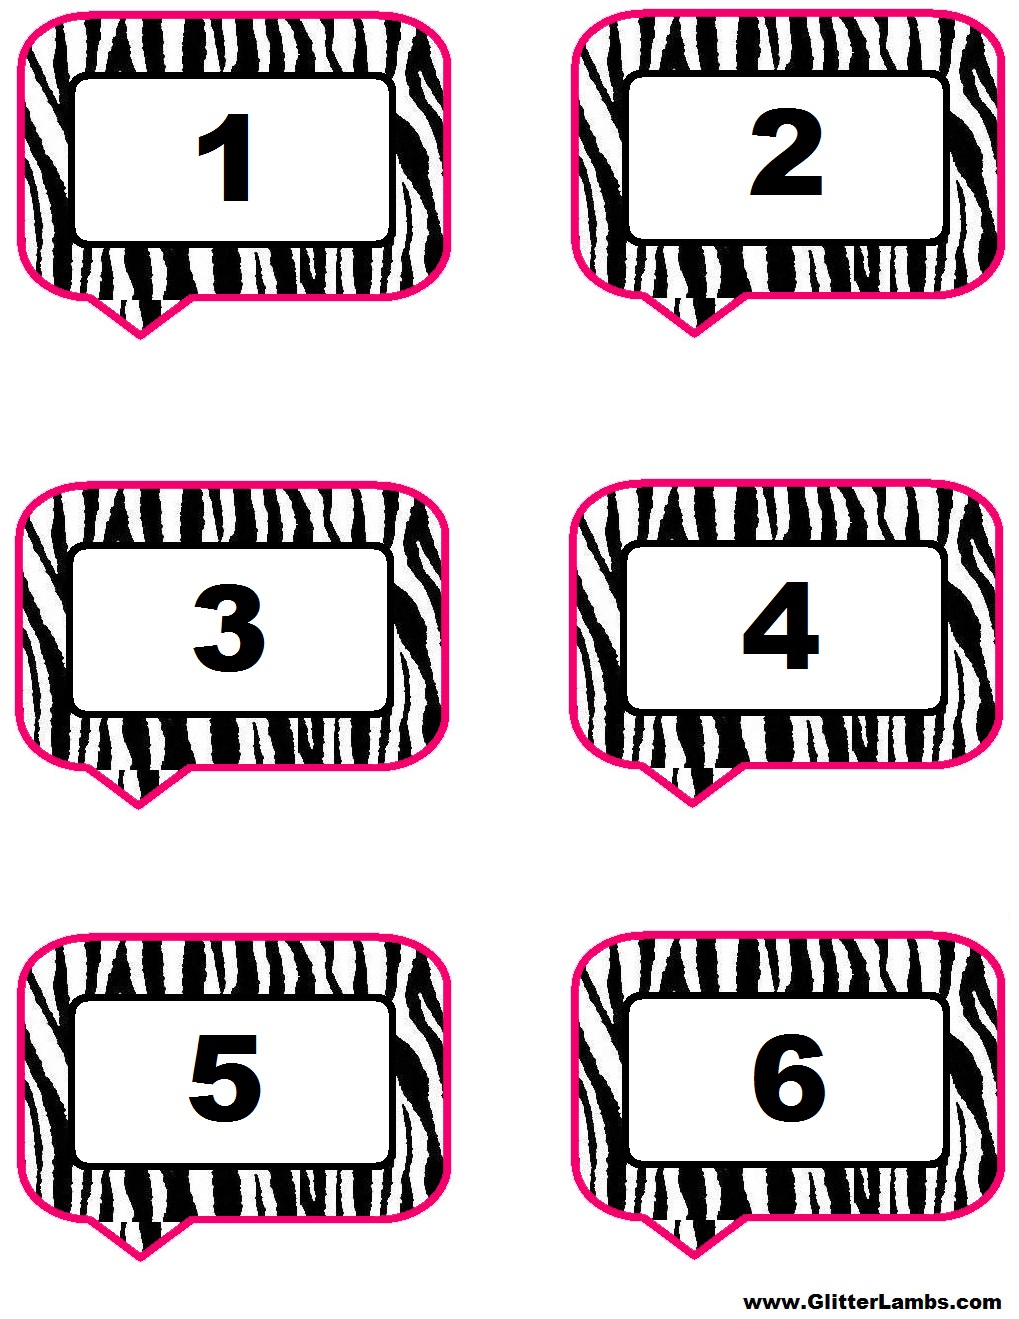 Glitter Lambs: Pink Zebra Food Label Cards And Free Printable 